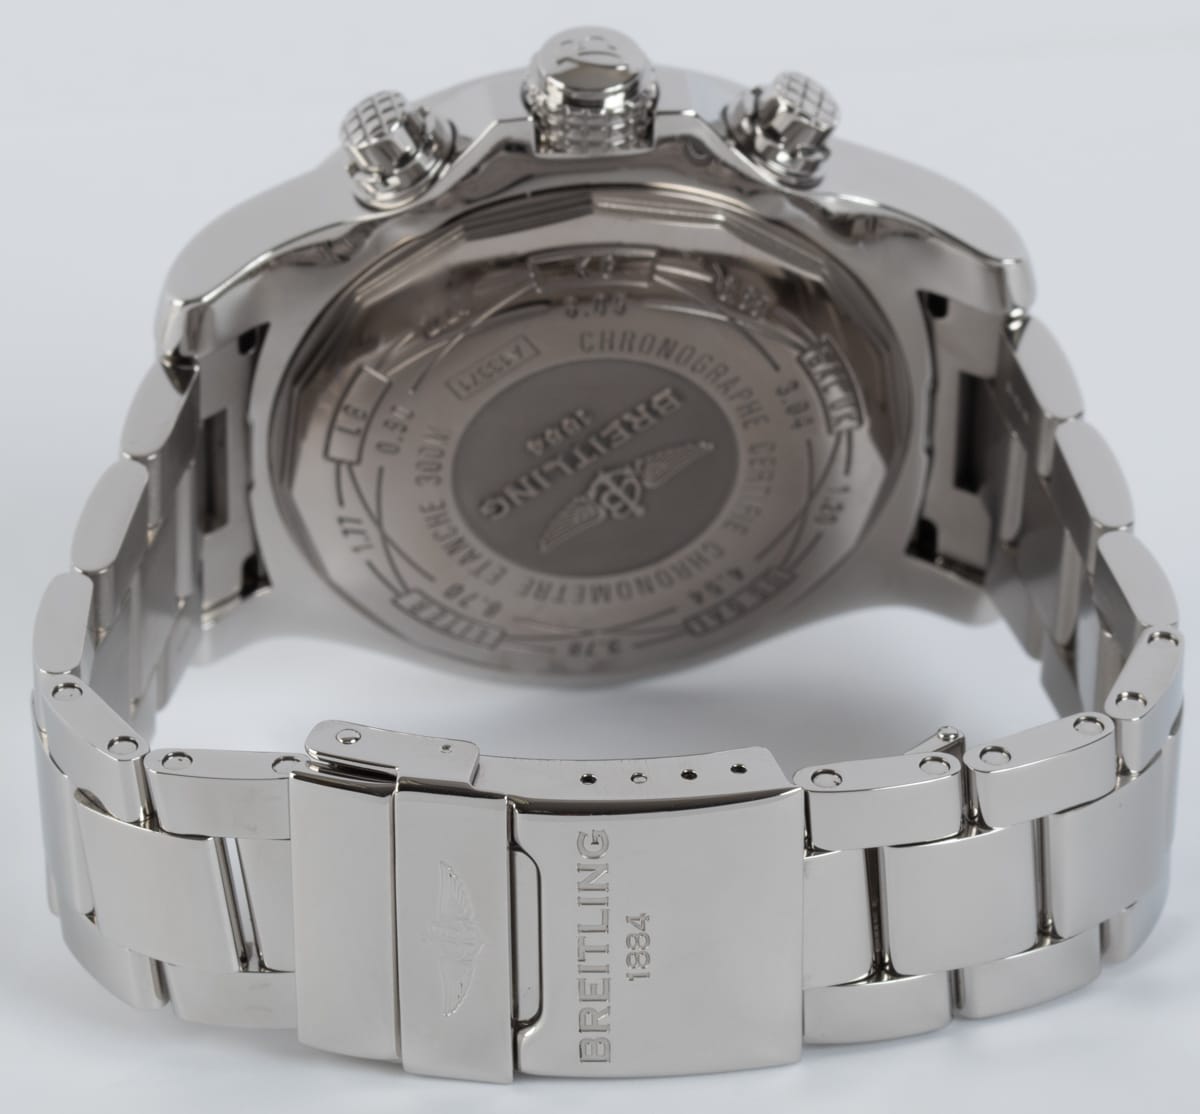 Rear / Band View of Super Avenger II Chronograph